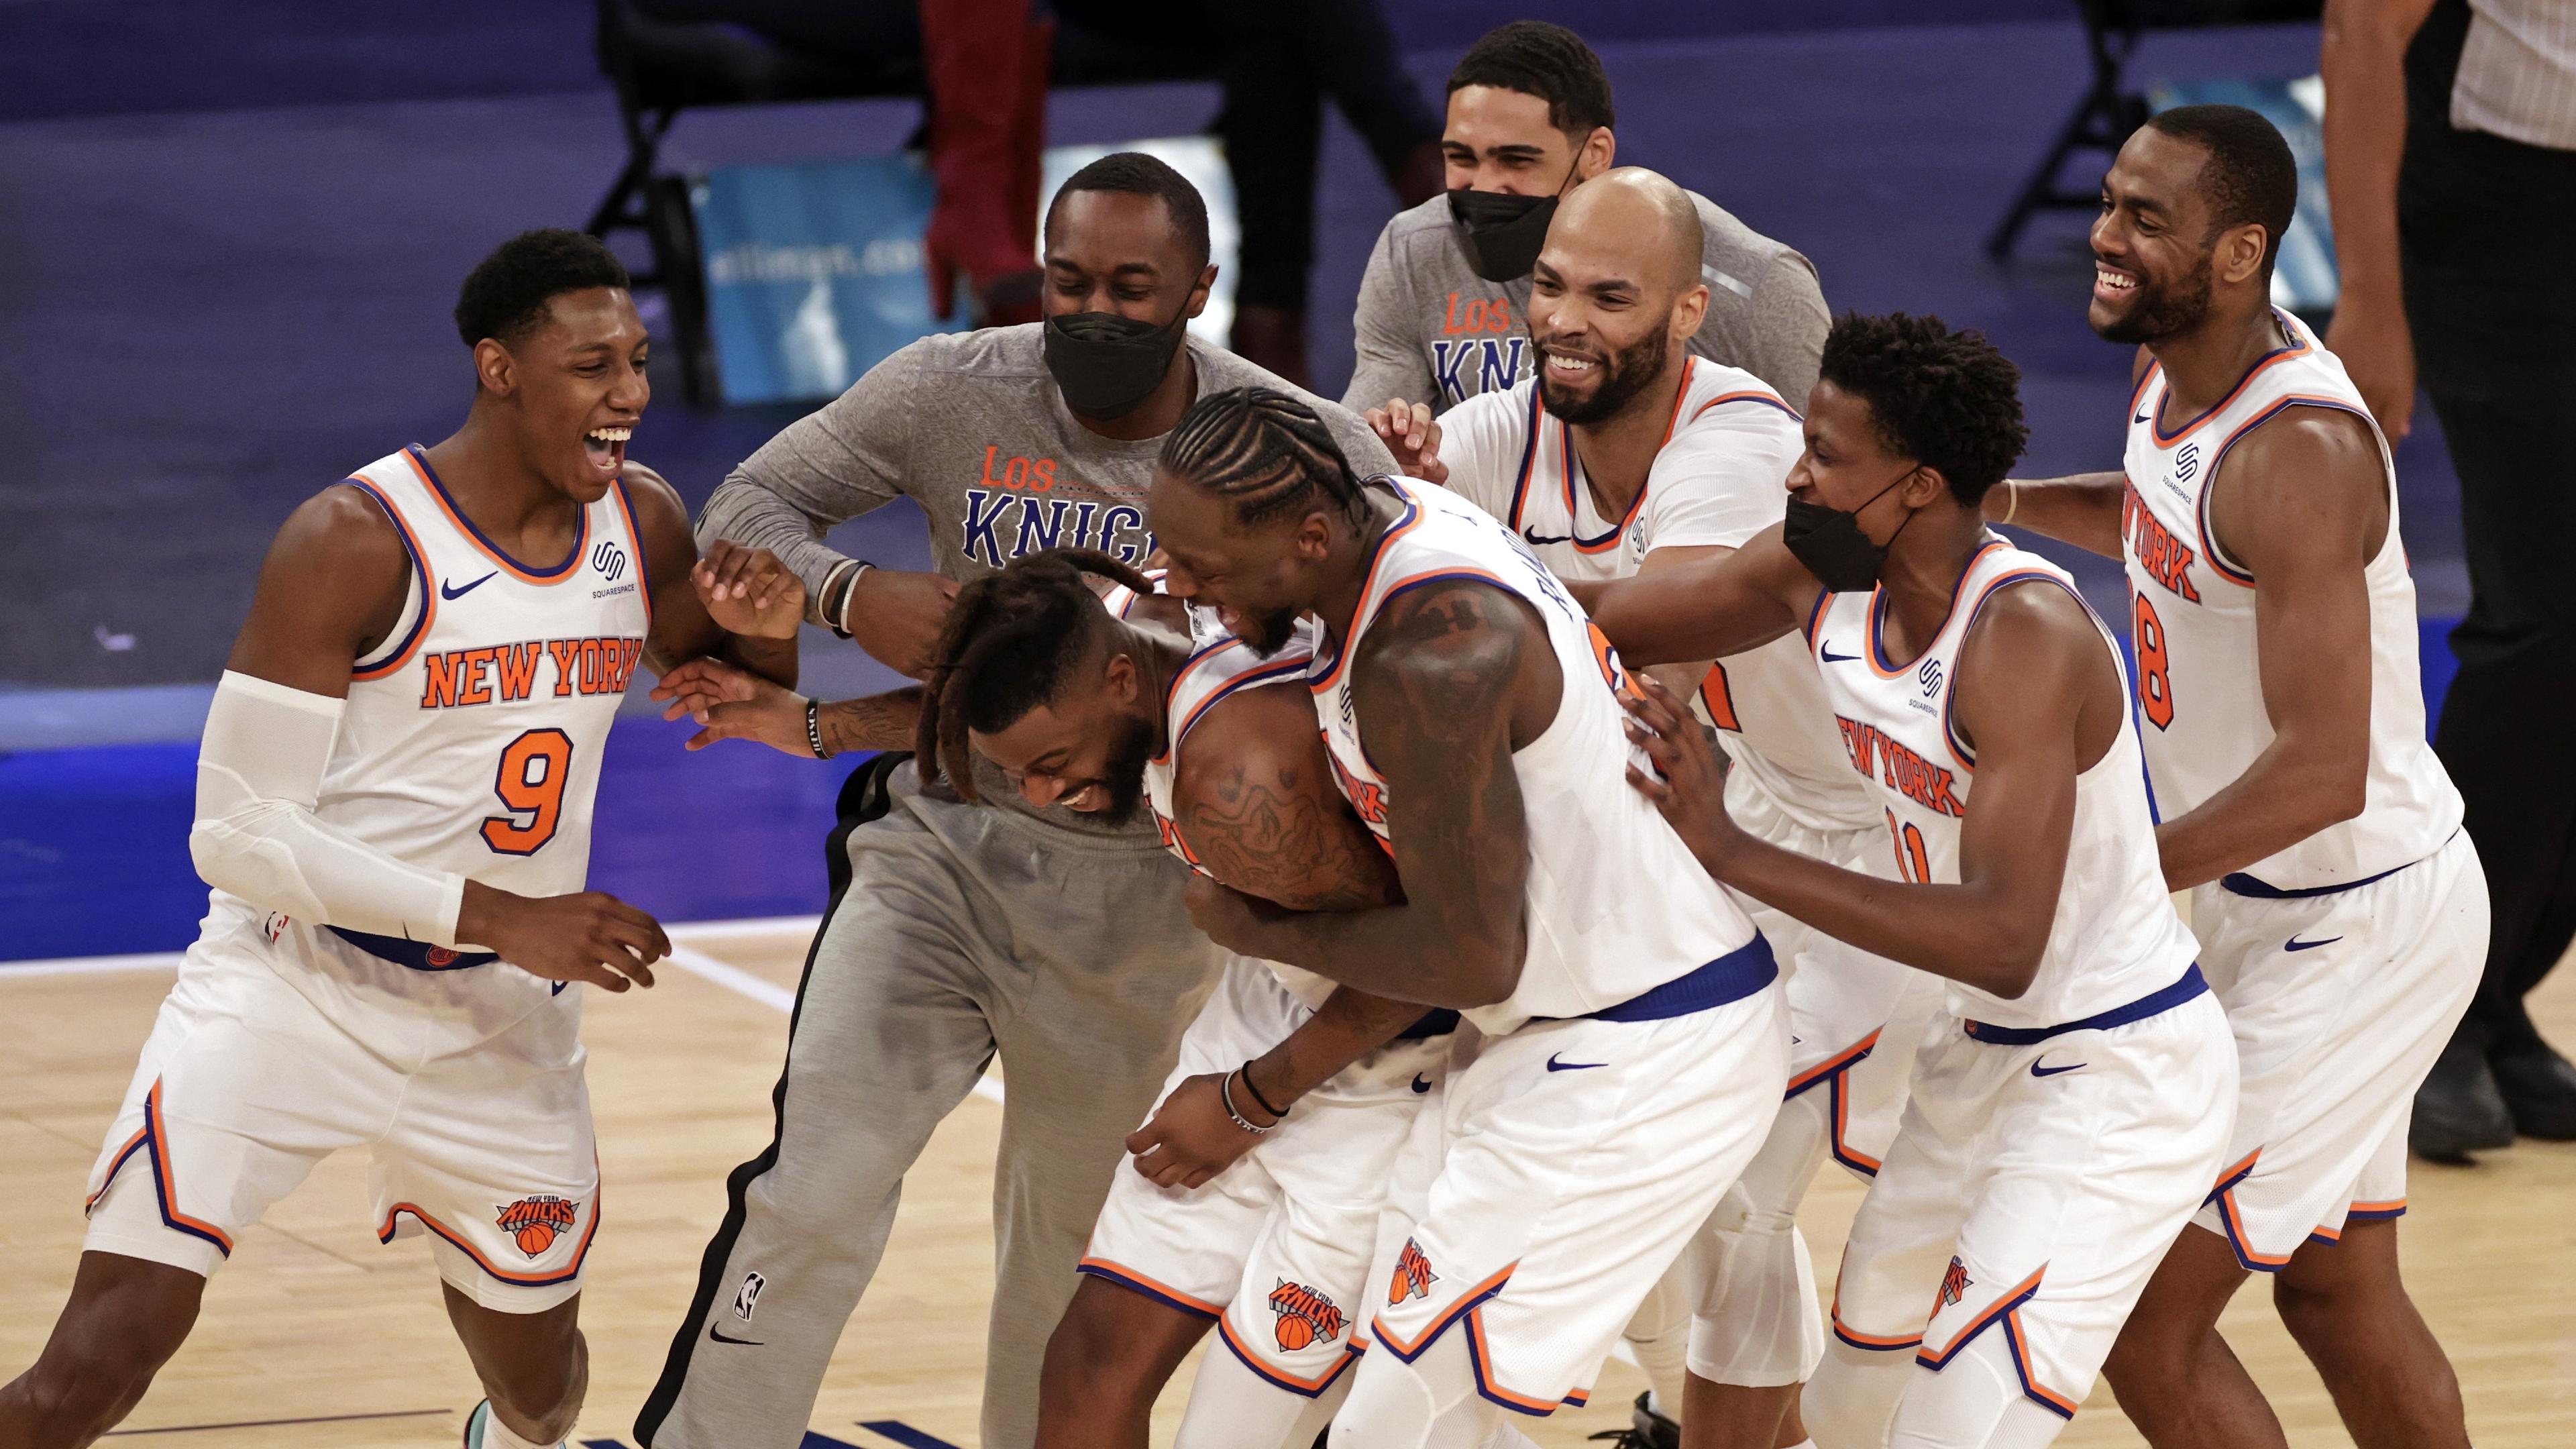 Mar 18, 2021; New York, New York, USA; New York Knicks forward Reggie Bullock is mobbed by teammates after taking the ball away from the Orlando Magic in the final seconds of the second half of an NBA basketball game Thursday, March 18, 2021, in New York. The Knicks won 94-93. / © Pool Photo-USA TODAY Sports